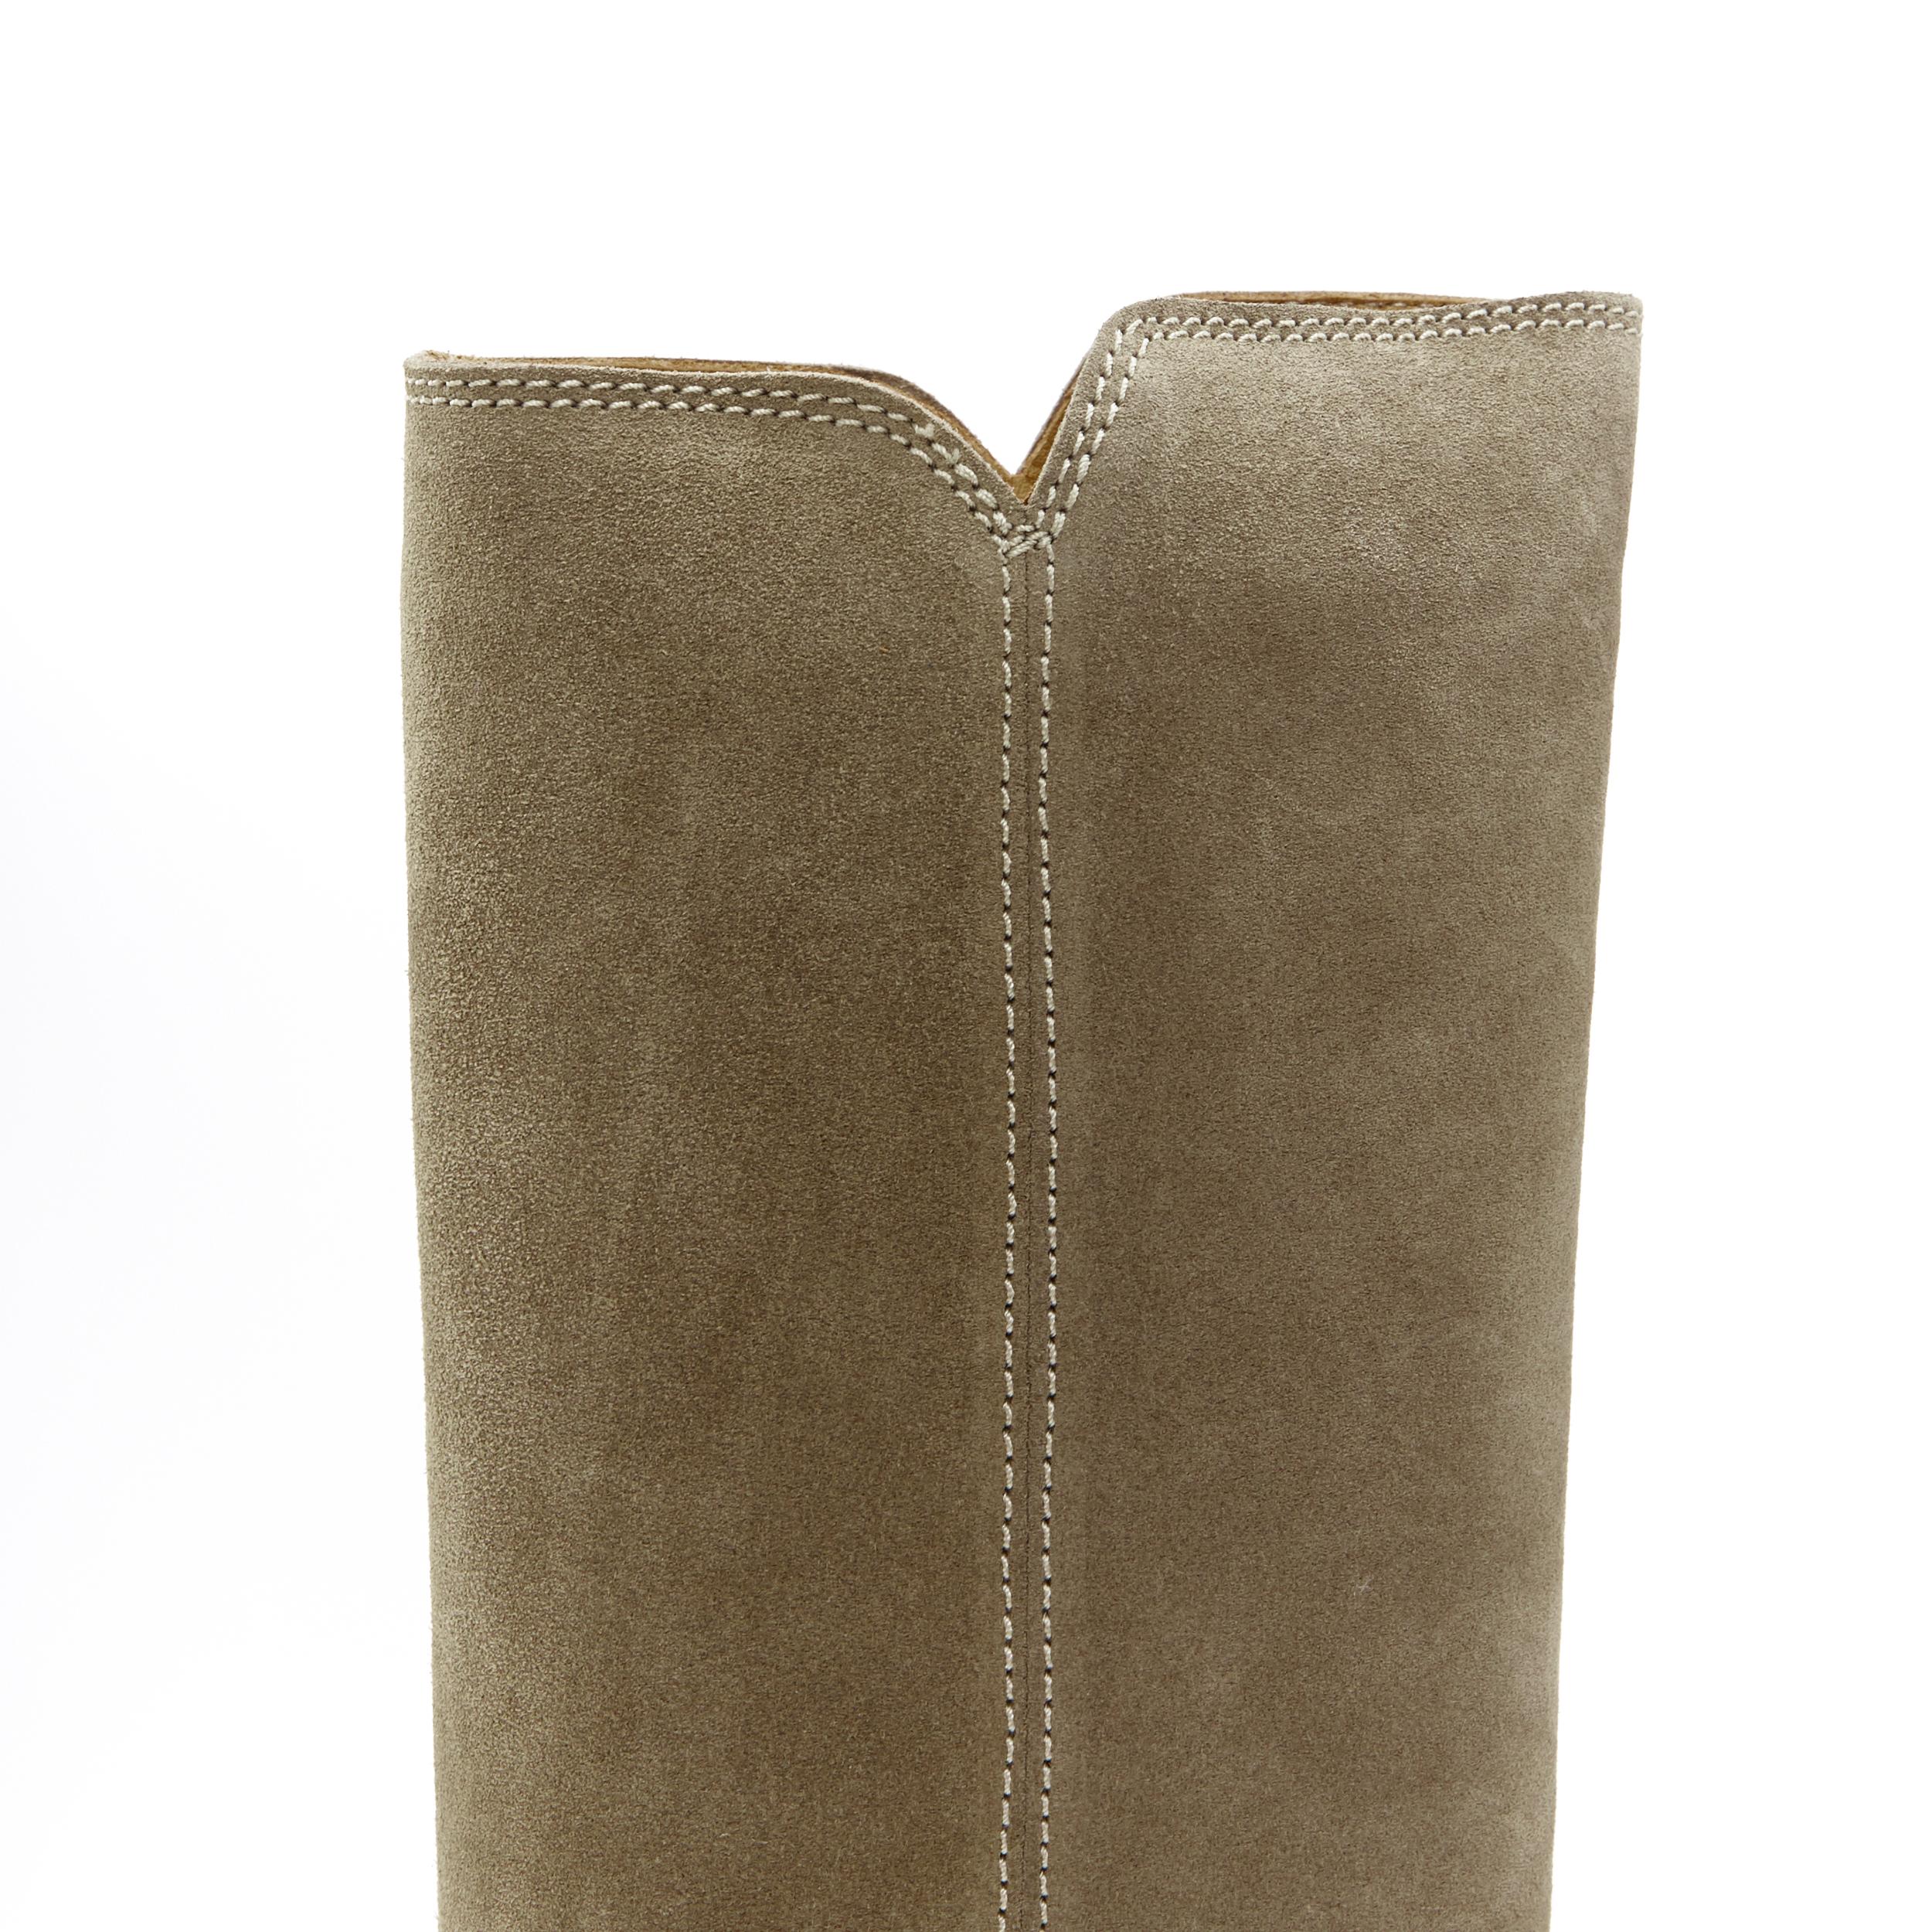 new ISABEL MARANT Cleave Taupe suede concealed wedge knee high western boot EU37 2